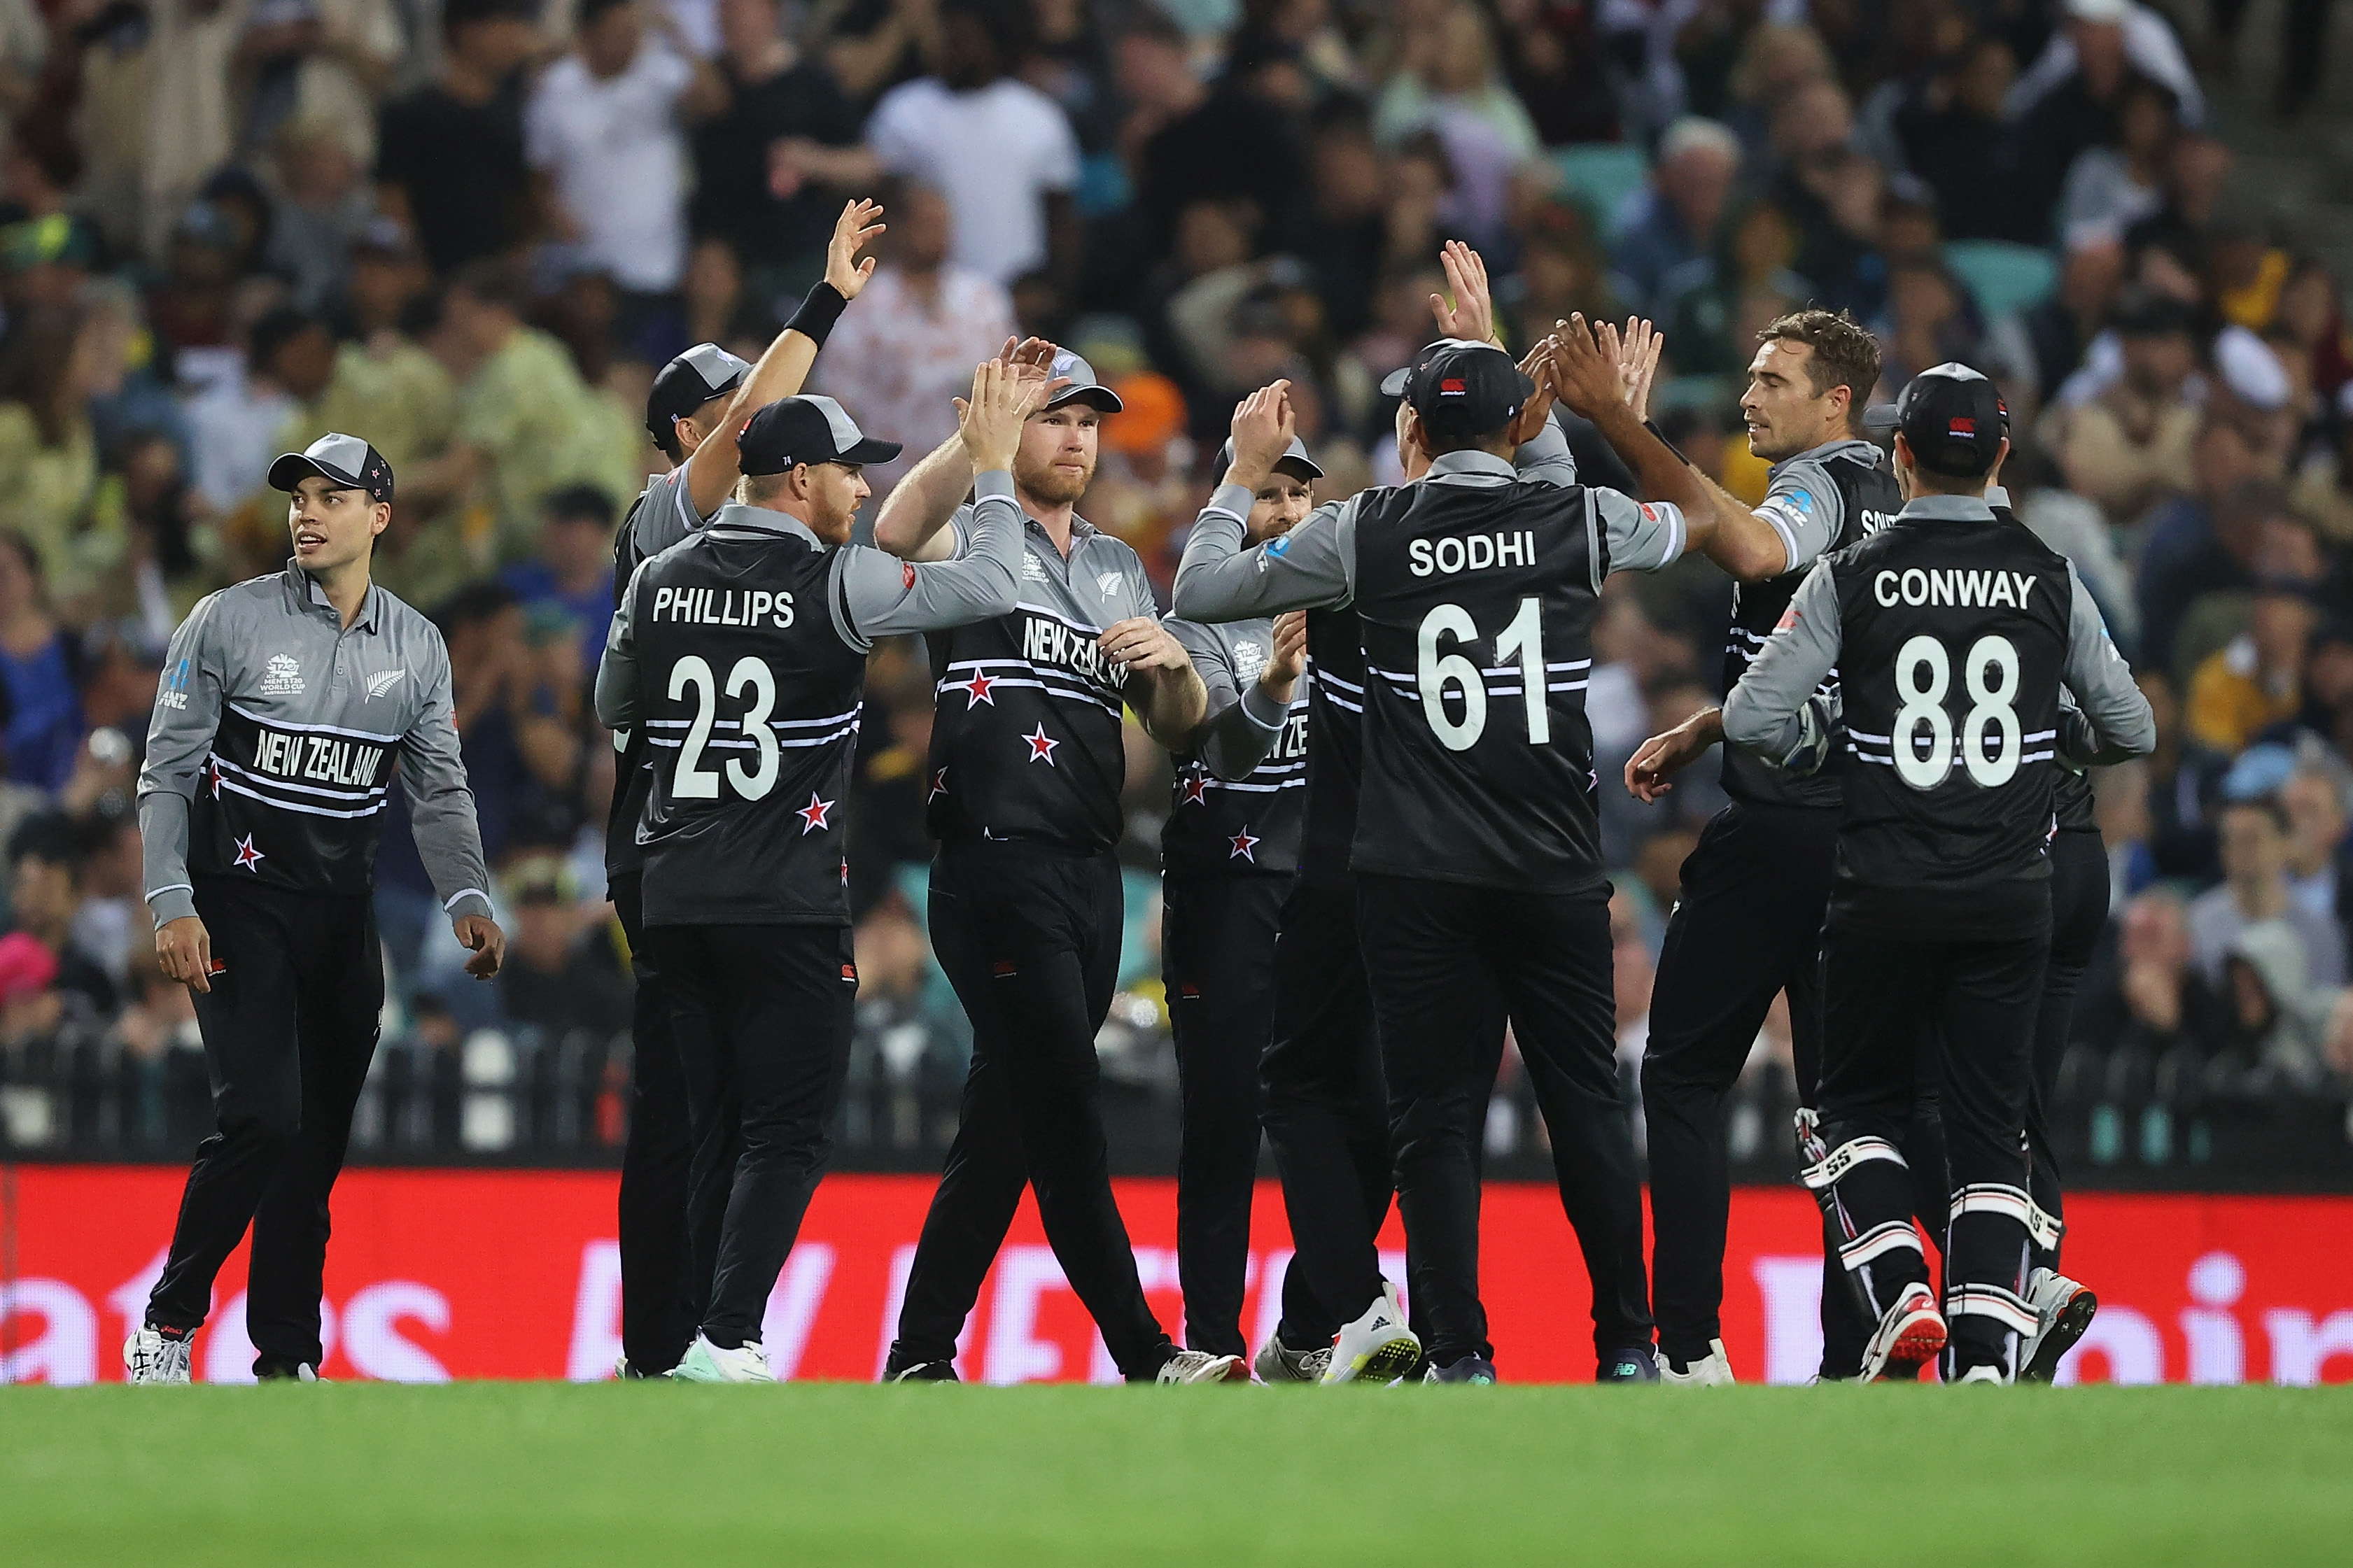 ICC World T20 | Twitter reacts as New Zealand decimate Australia by 89 runs